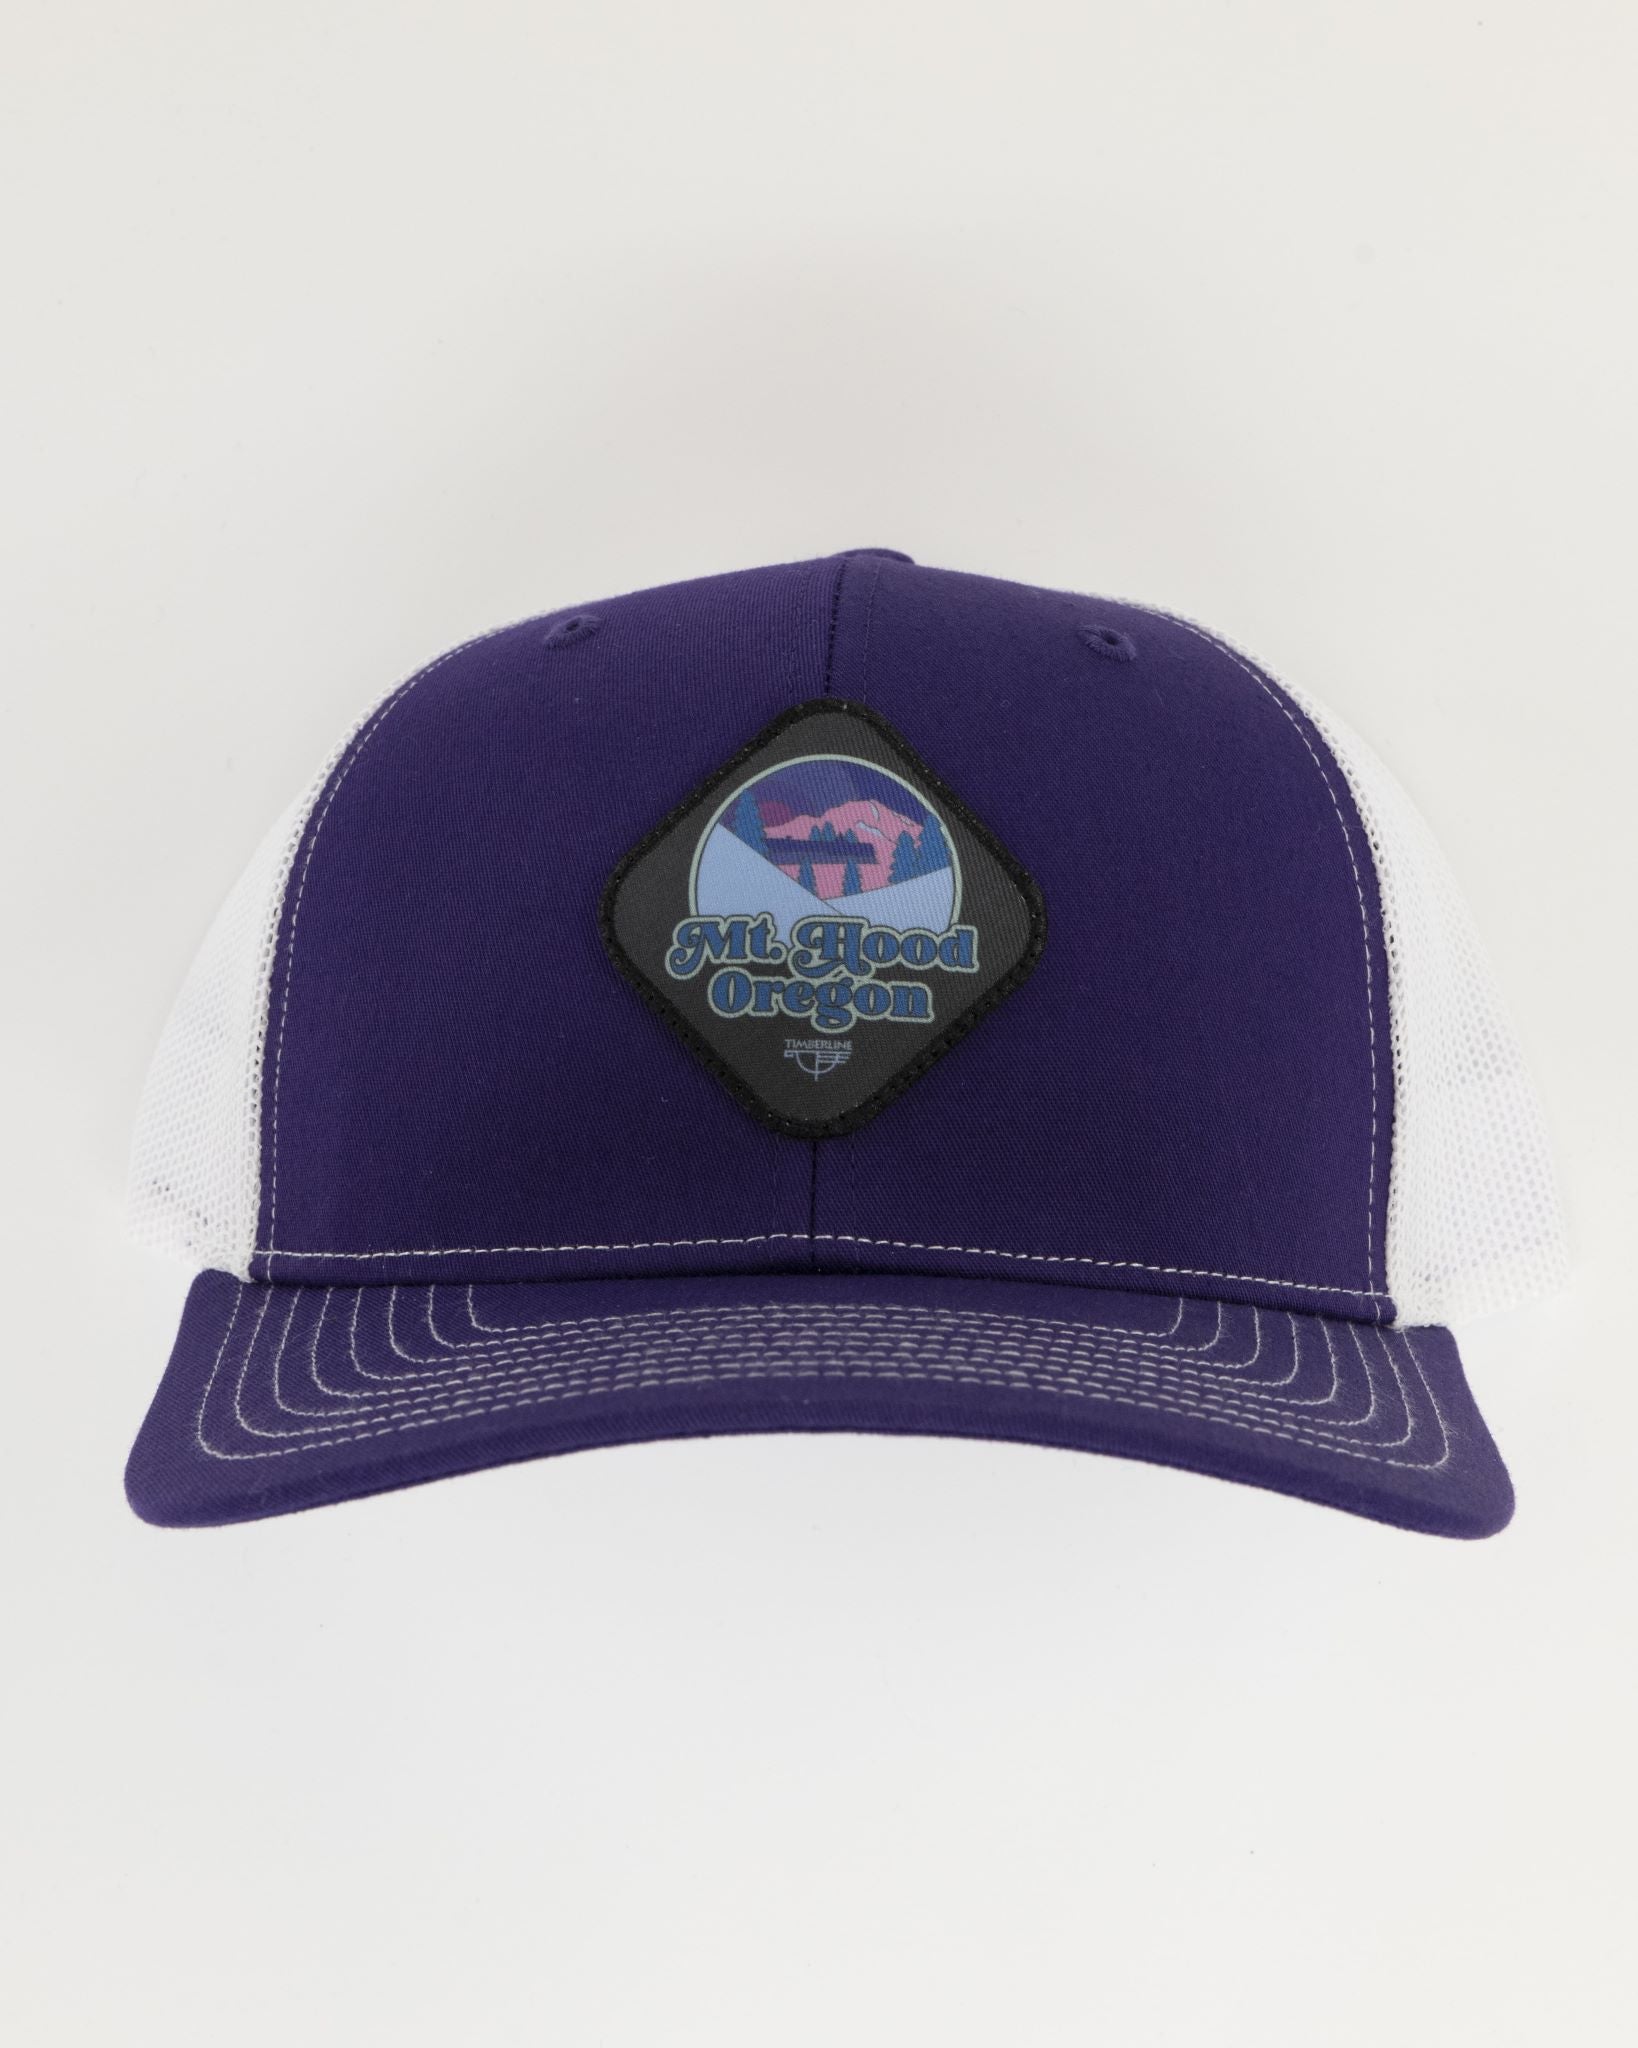 Hat - Iconic Cap - Navy Blue - Timberline Lodge Online Store